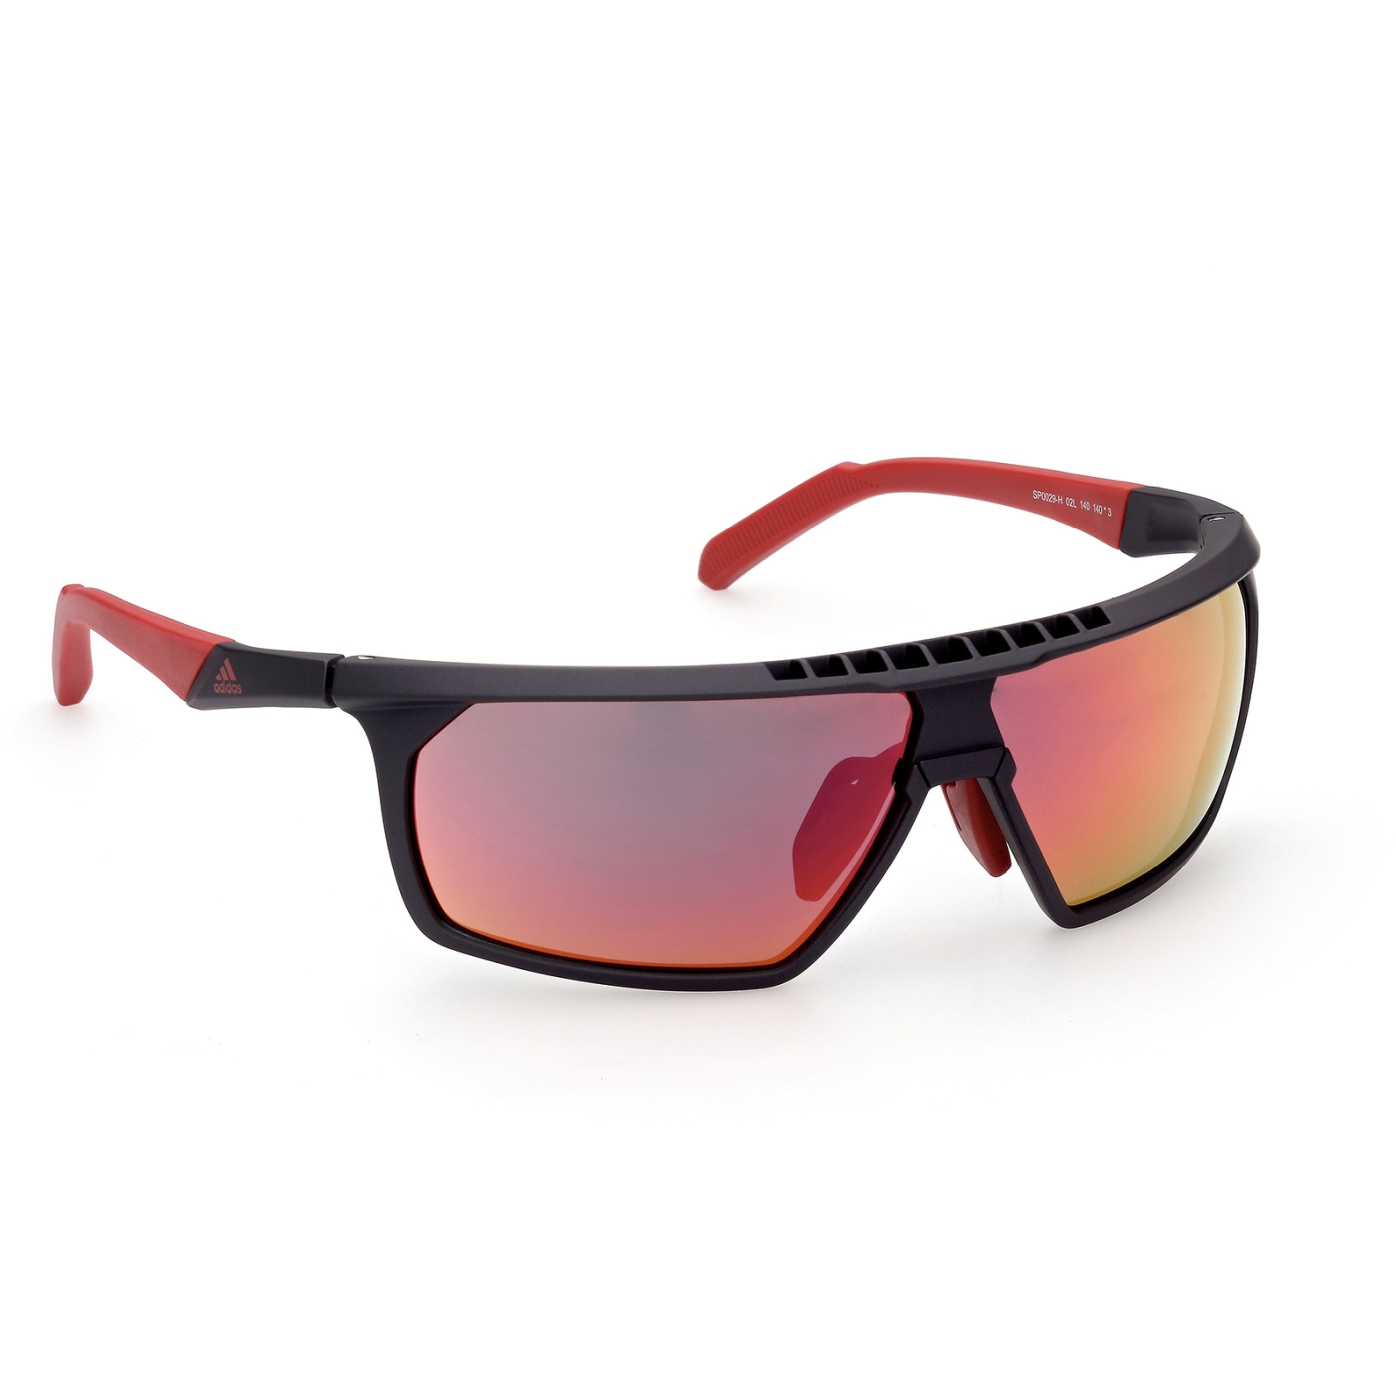 Picture of adidas Sp0030 Injected Sport Sunglasses - Matte Black / Contrast Mirror Red